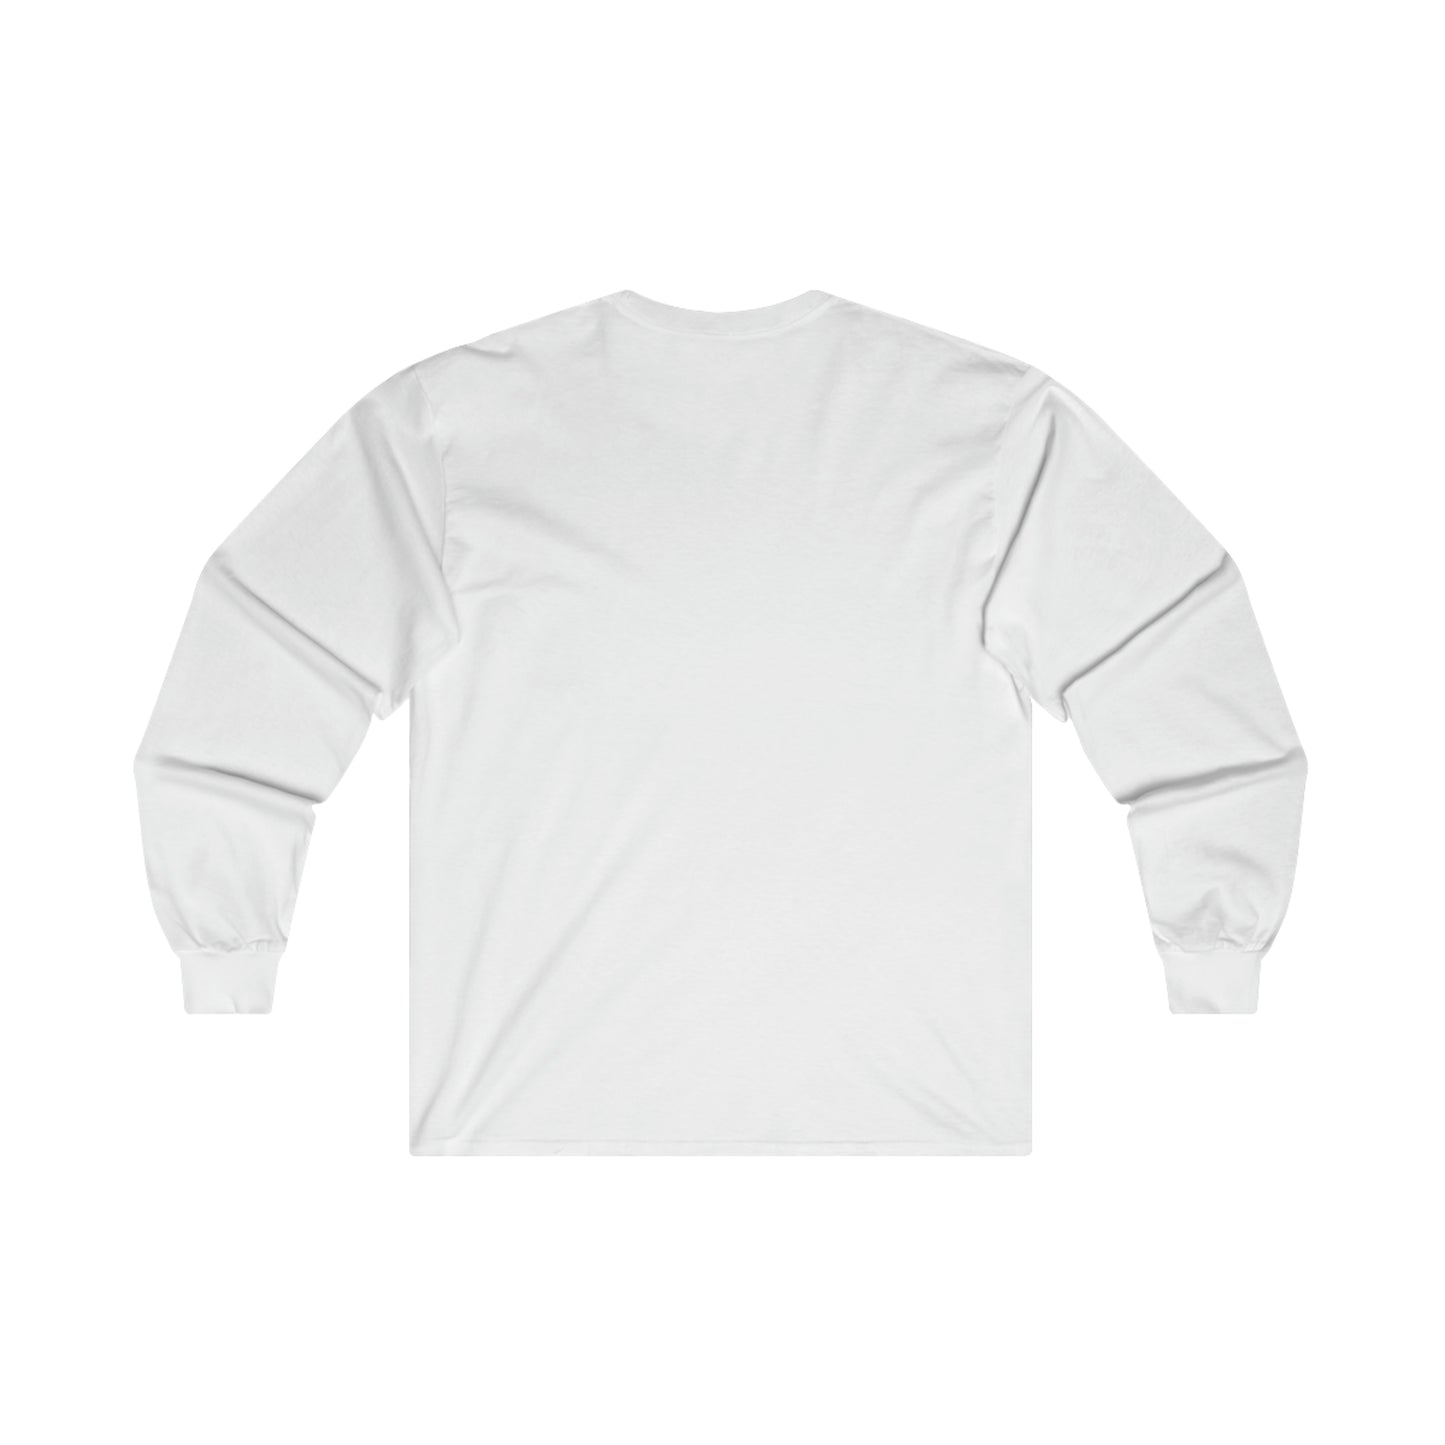 "I Need Your Grace" Cover Long Sleeve T-Shirt